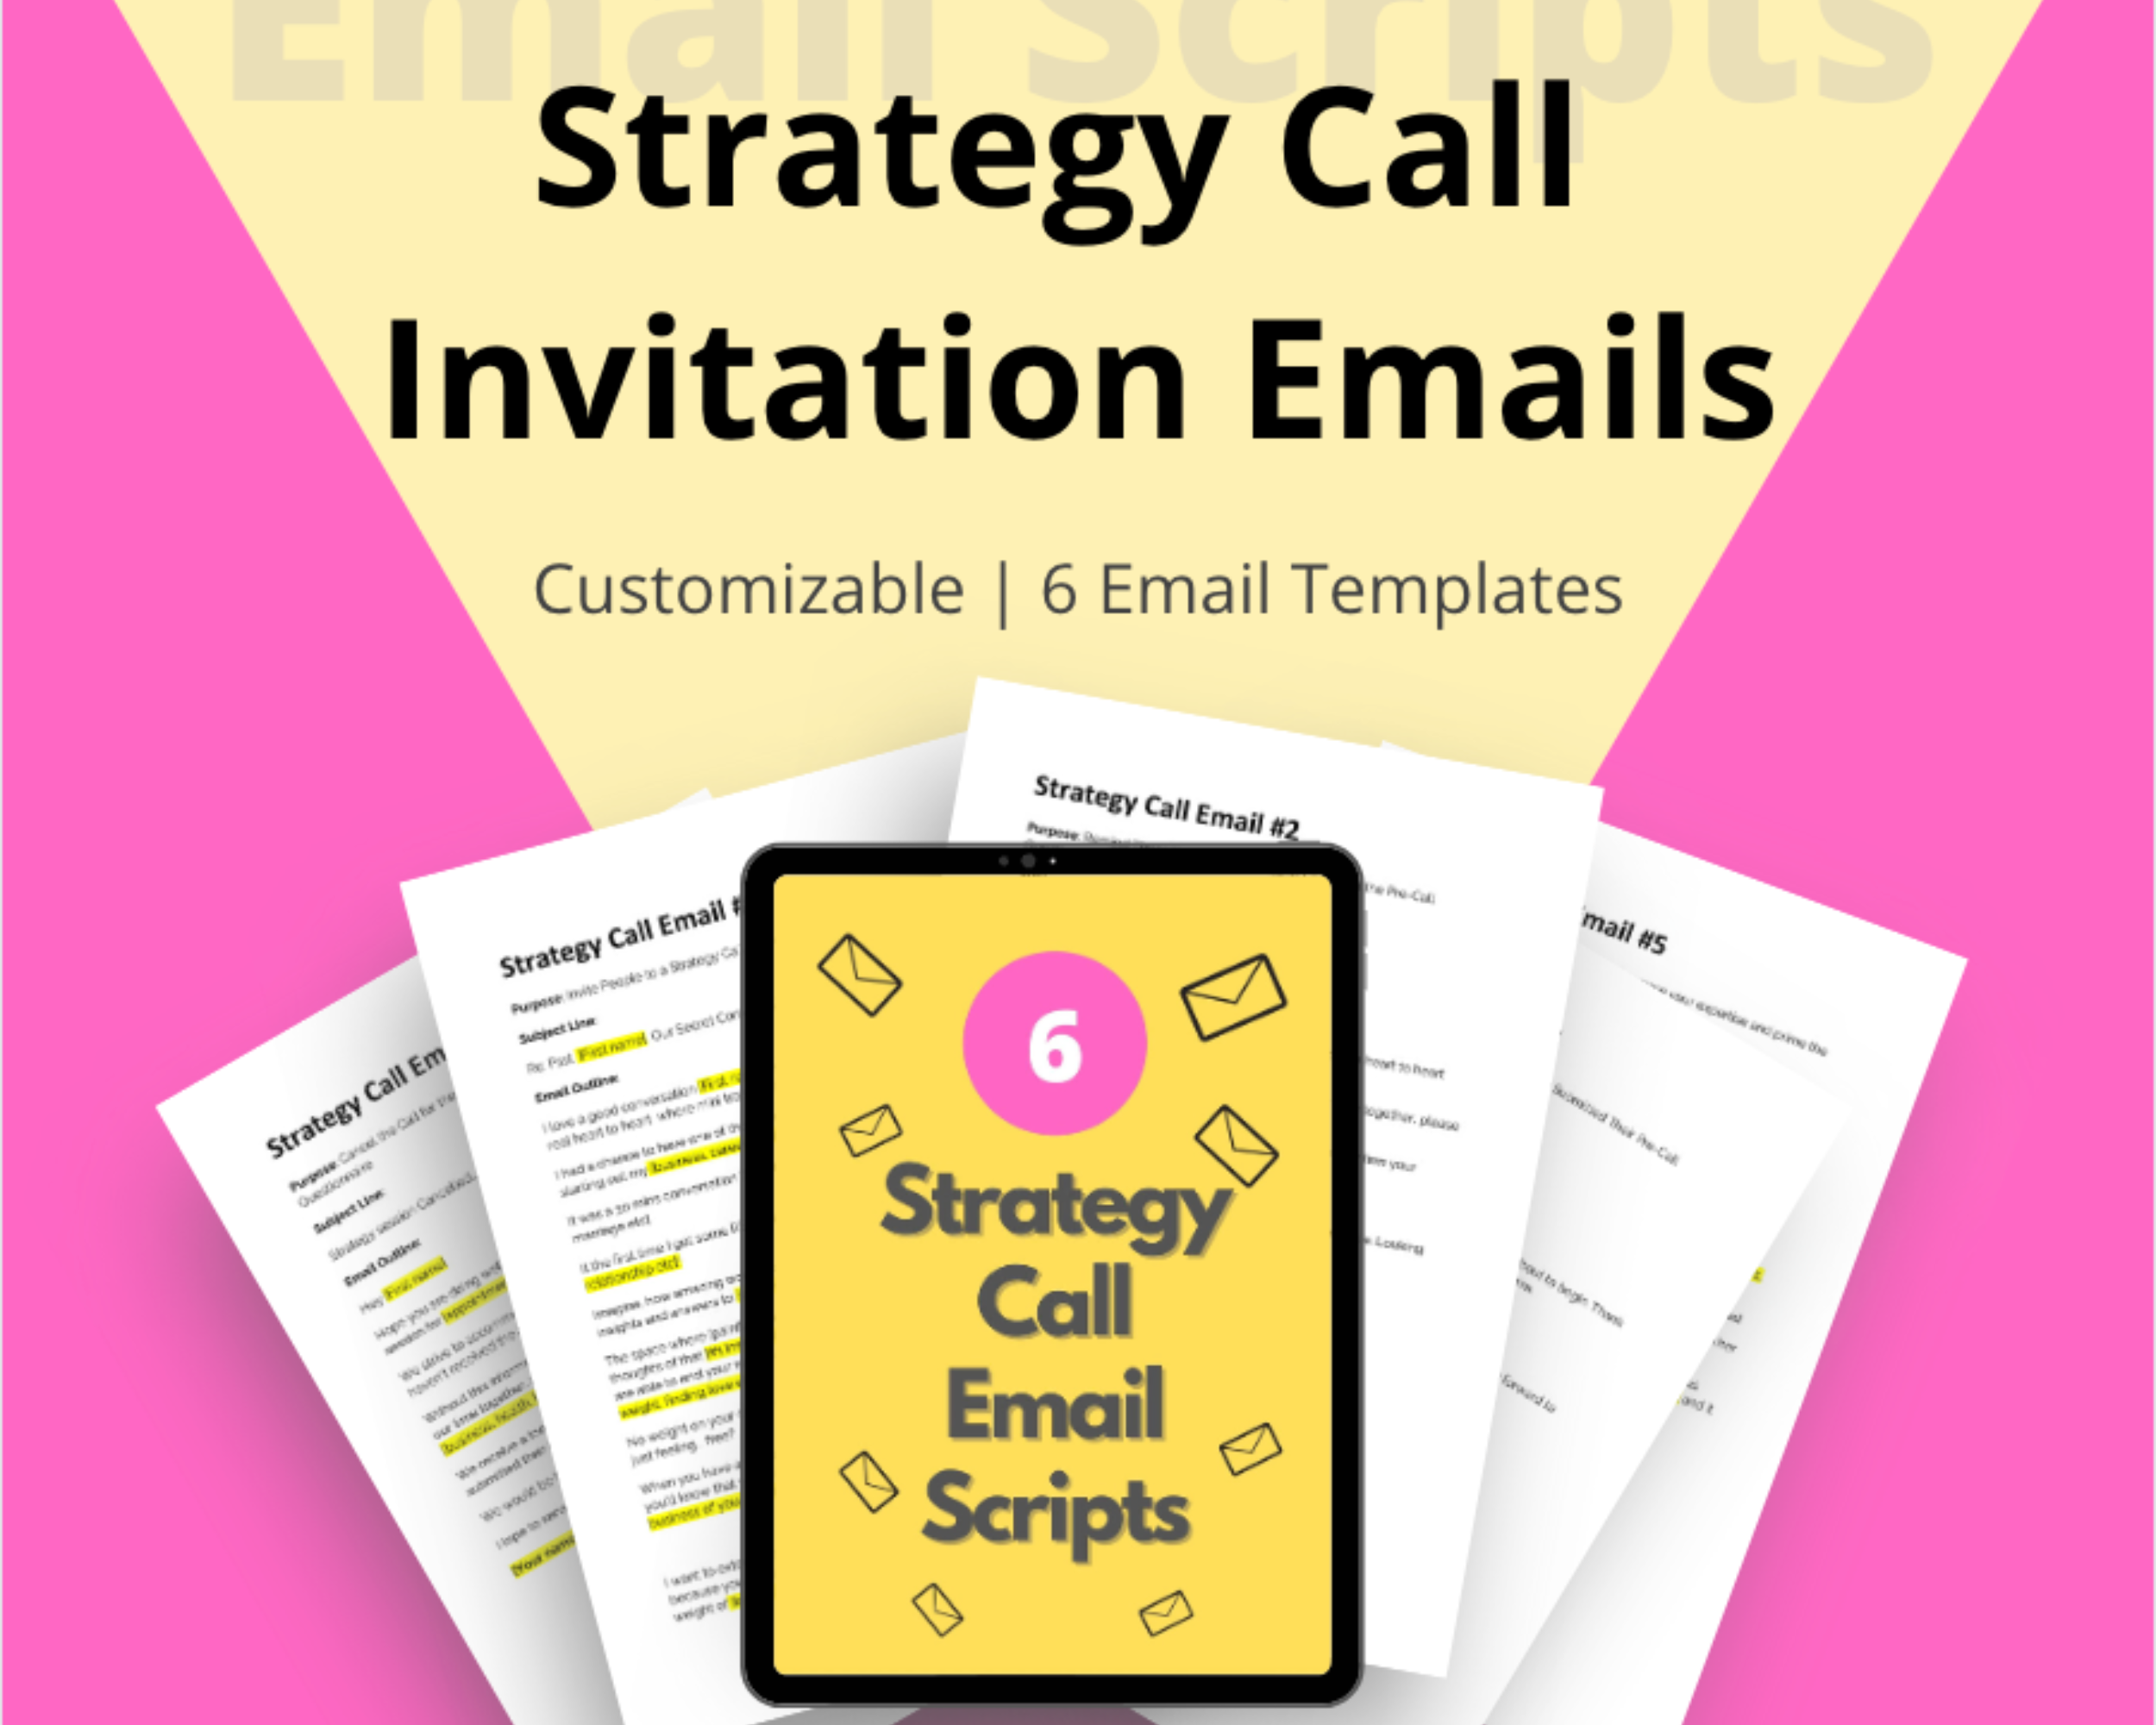 Strategy Call Invitation Email Sequence